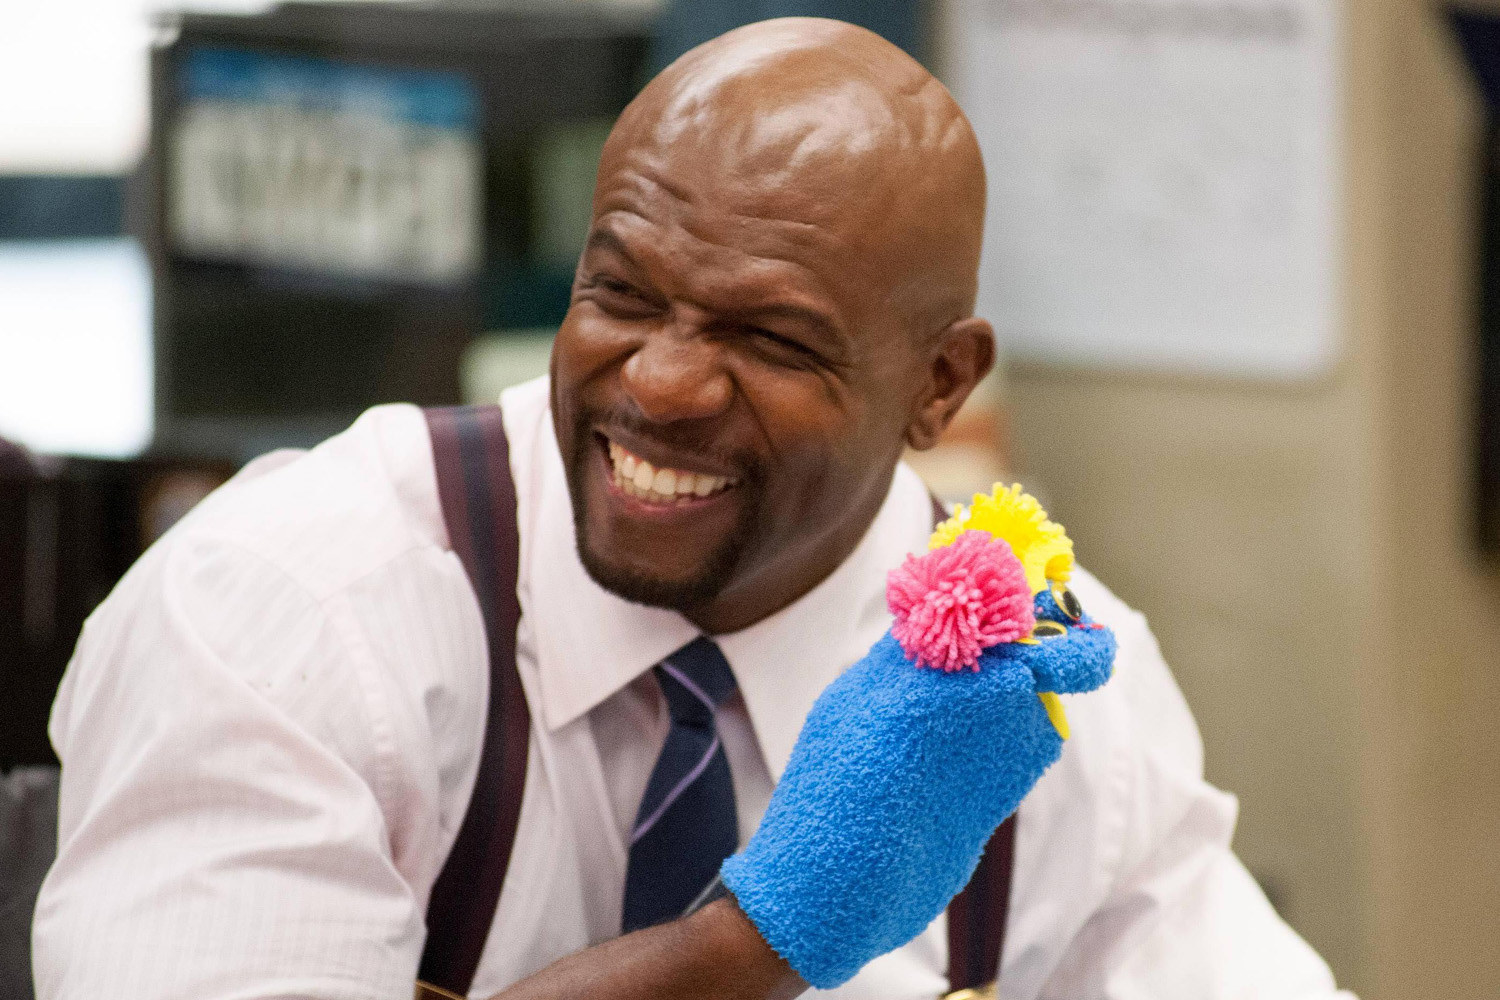 Terry Jeffords.